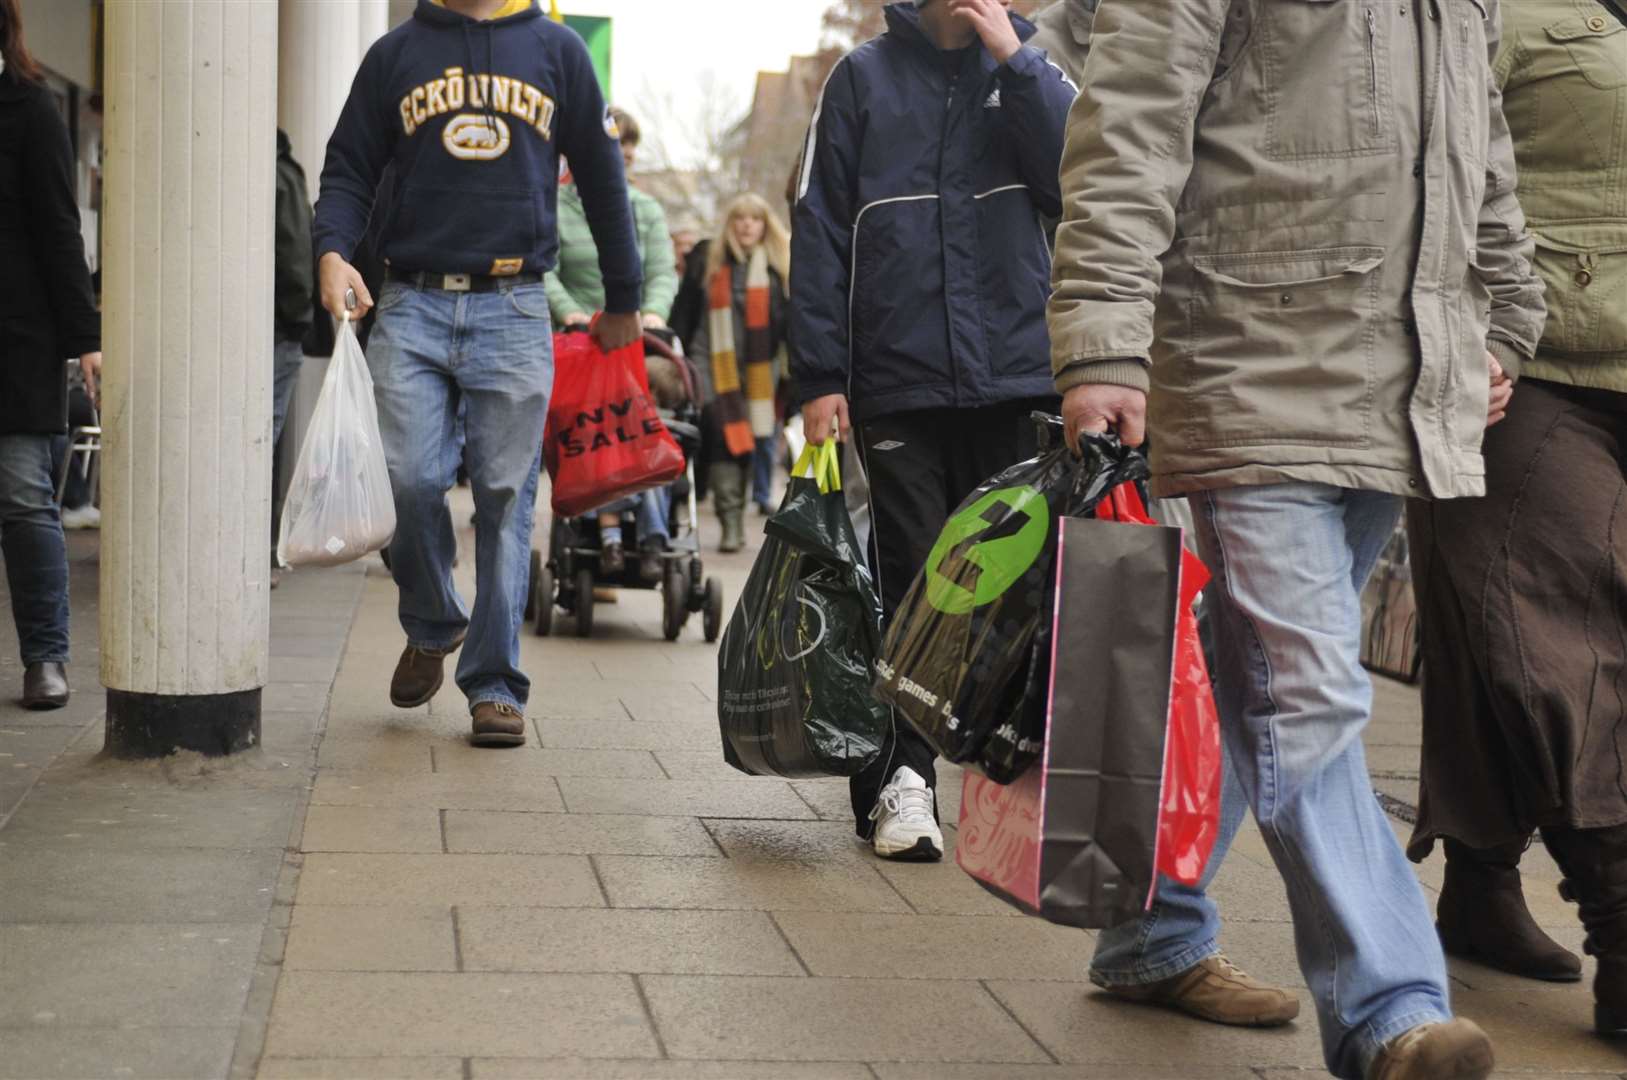 Our shopping habits are undergoing a seismic shift - propelled by the pandemic